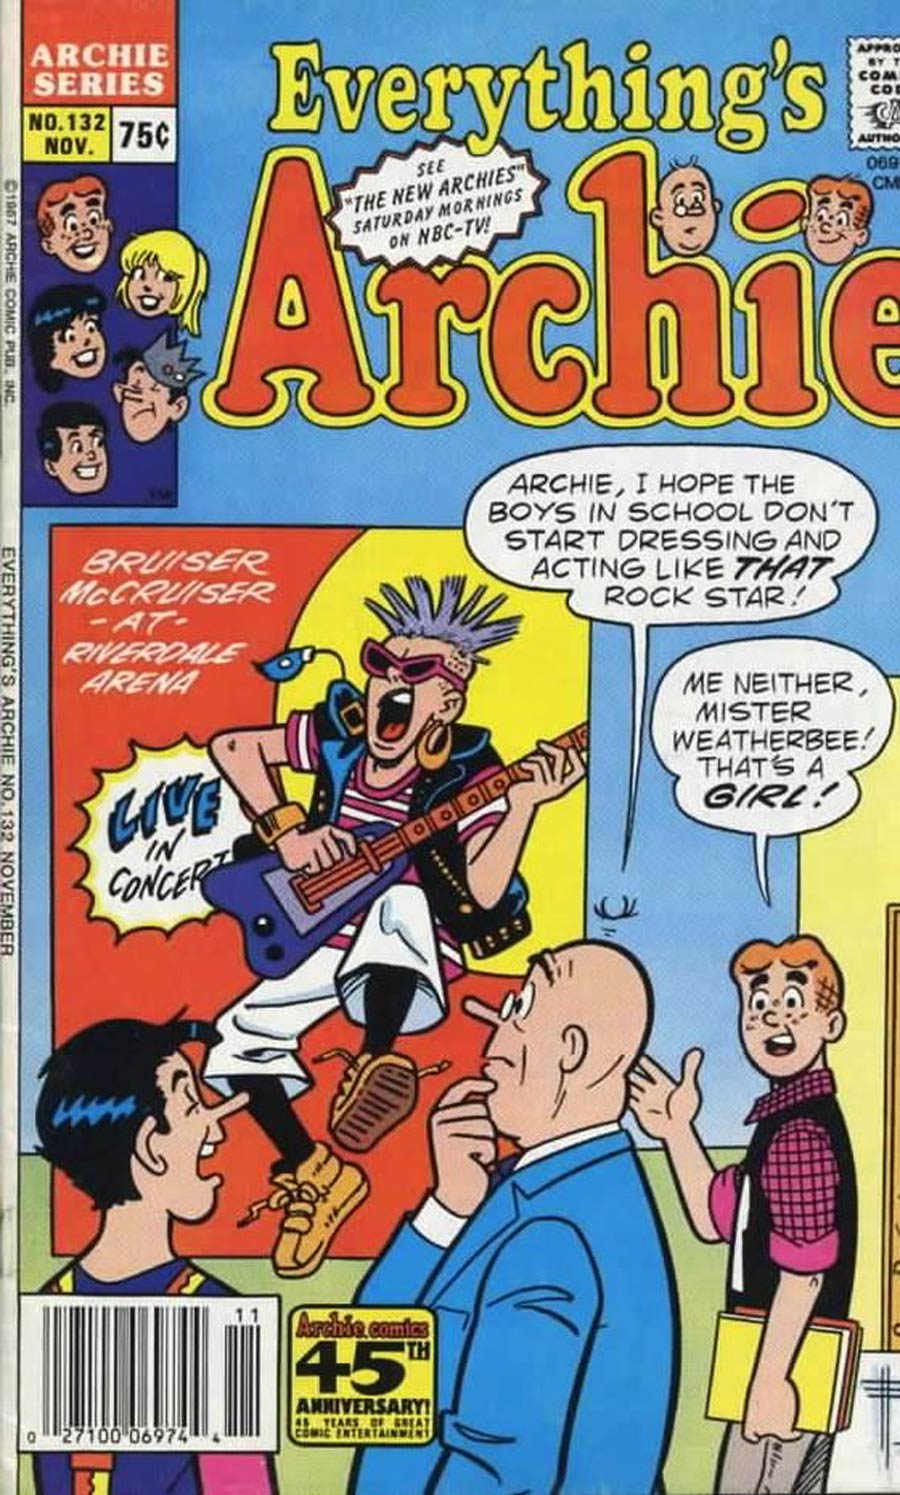 Everythings Archie #132